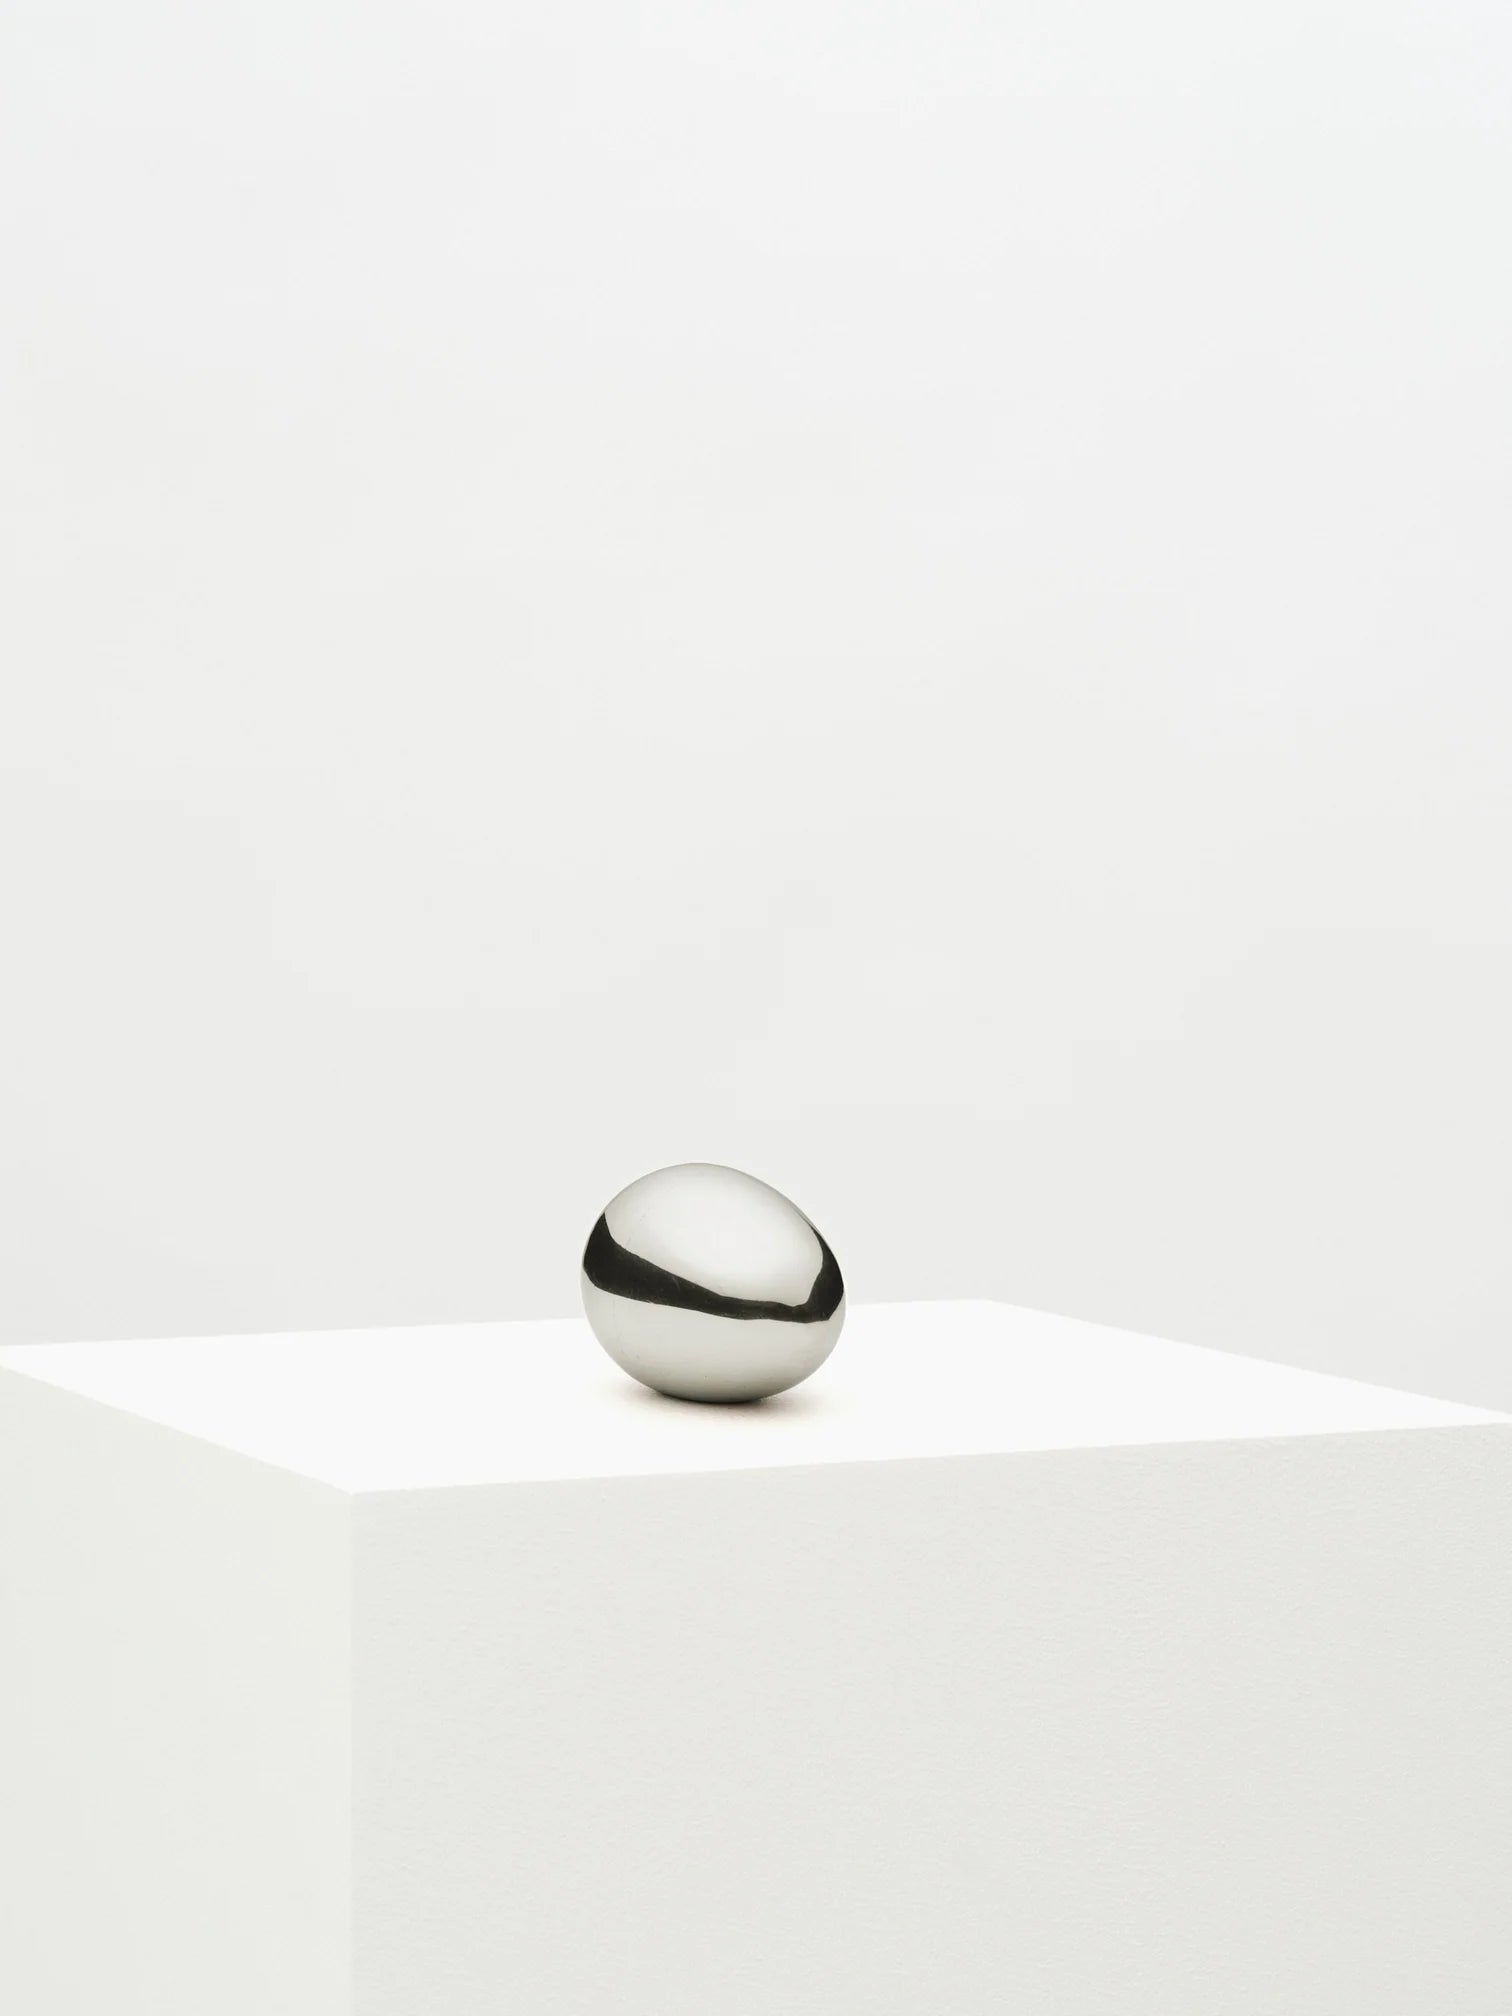 Silver Egg Paperweight